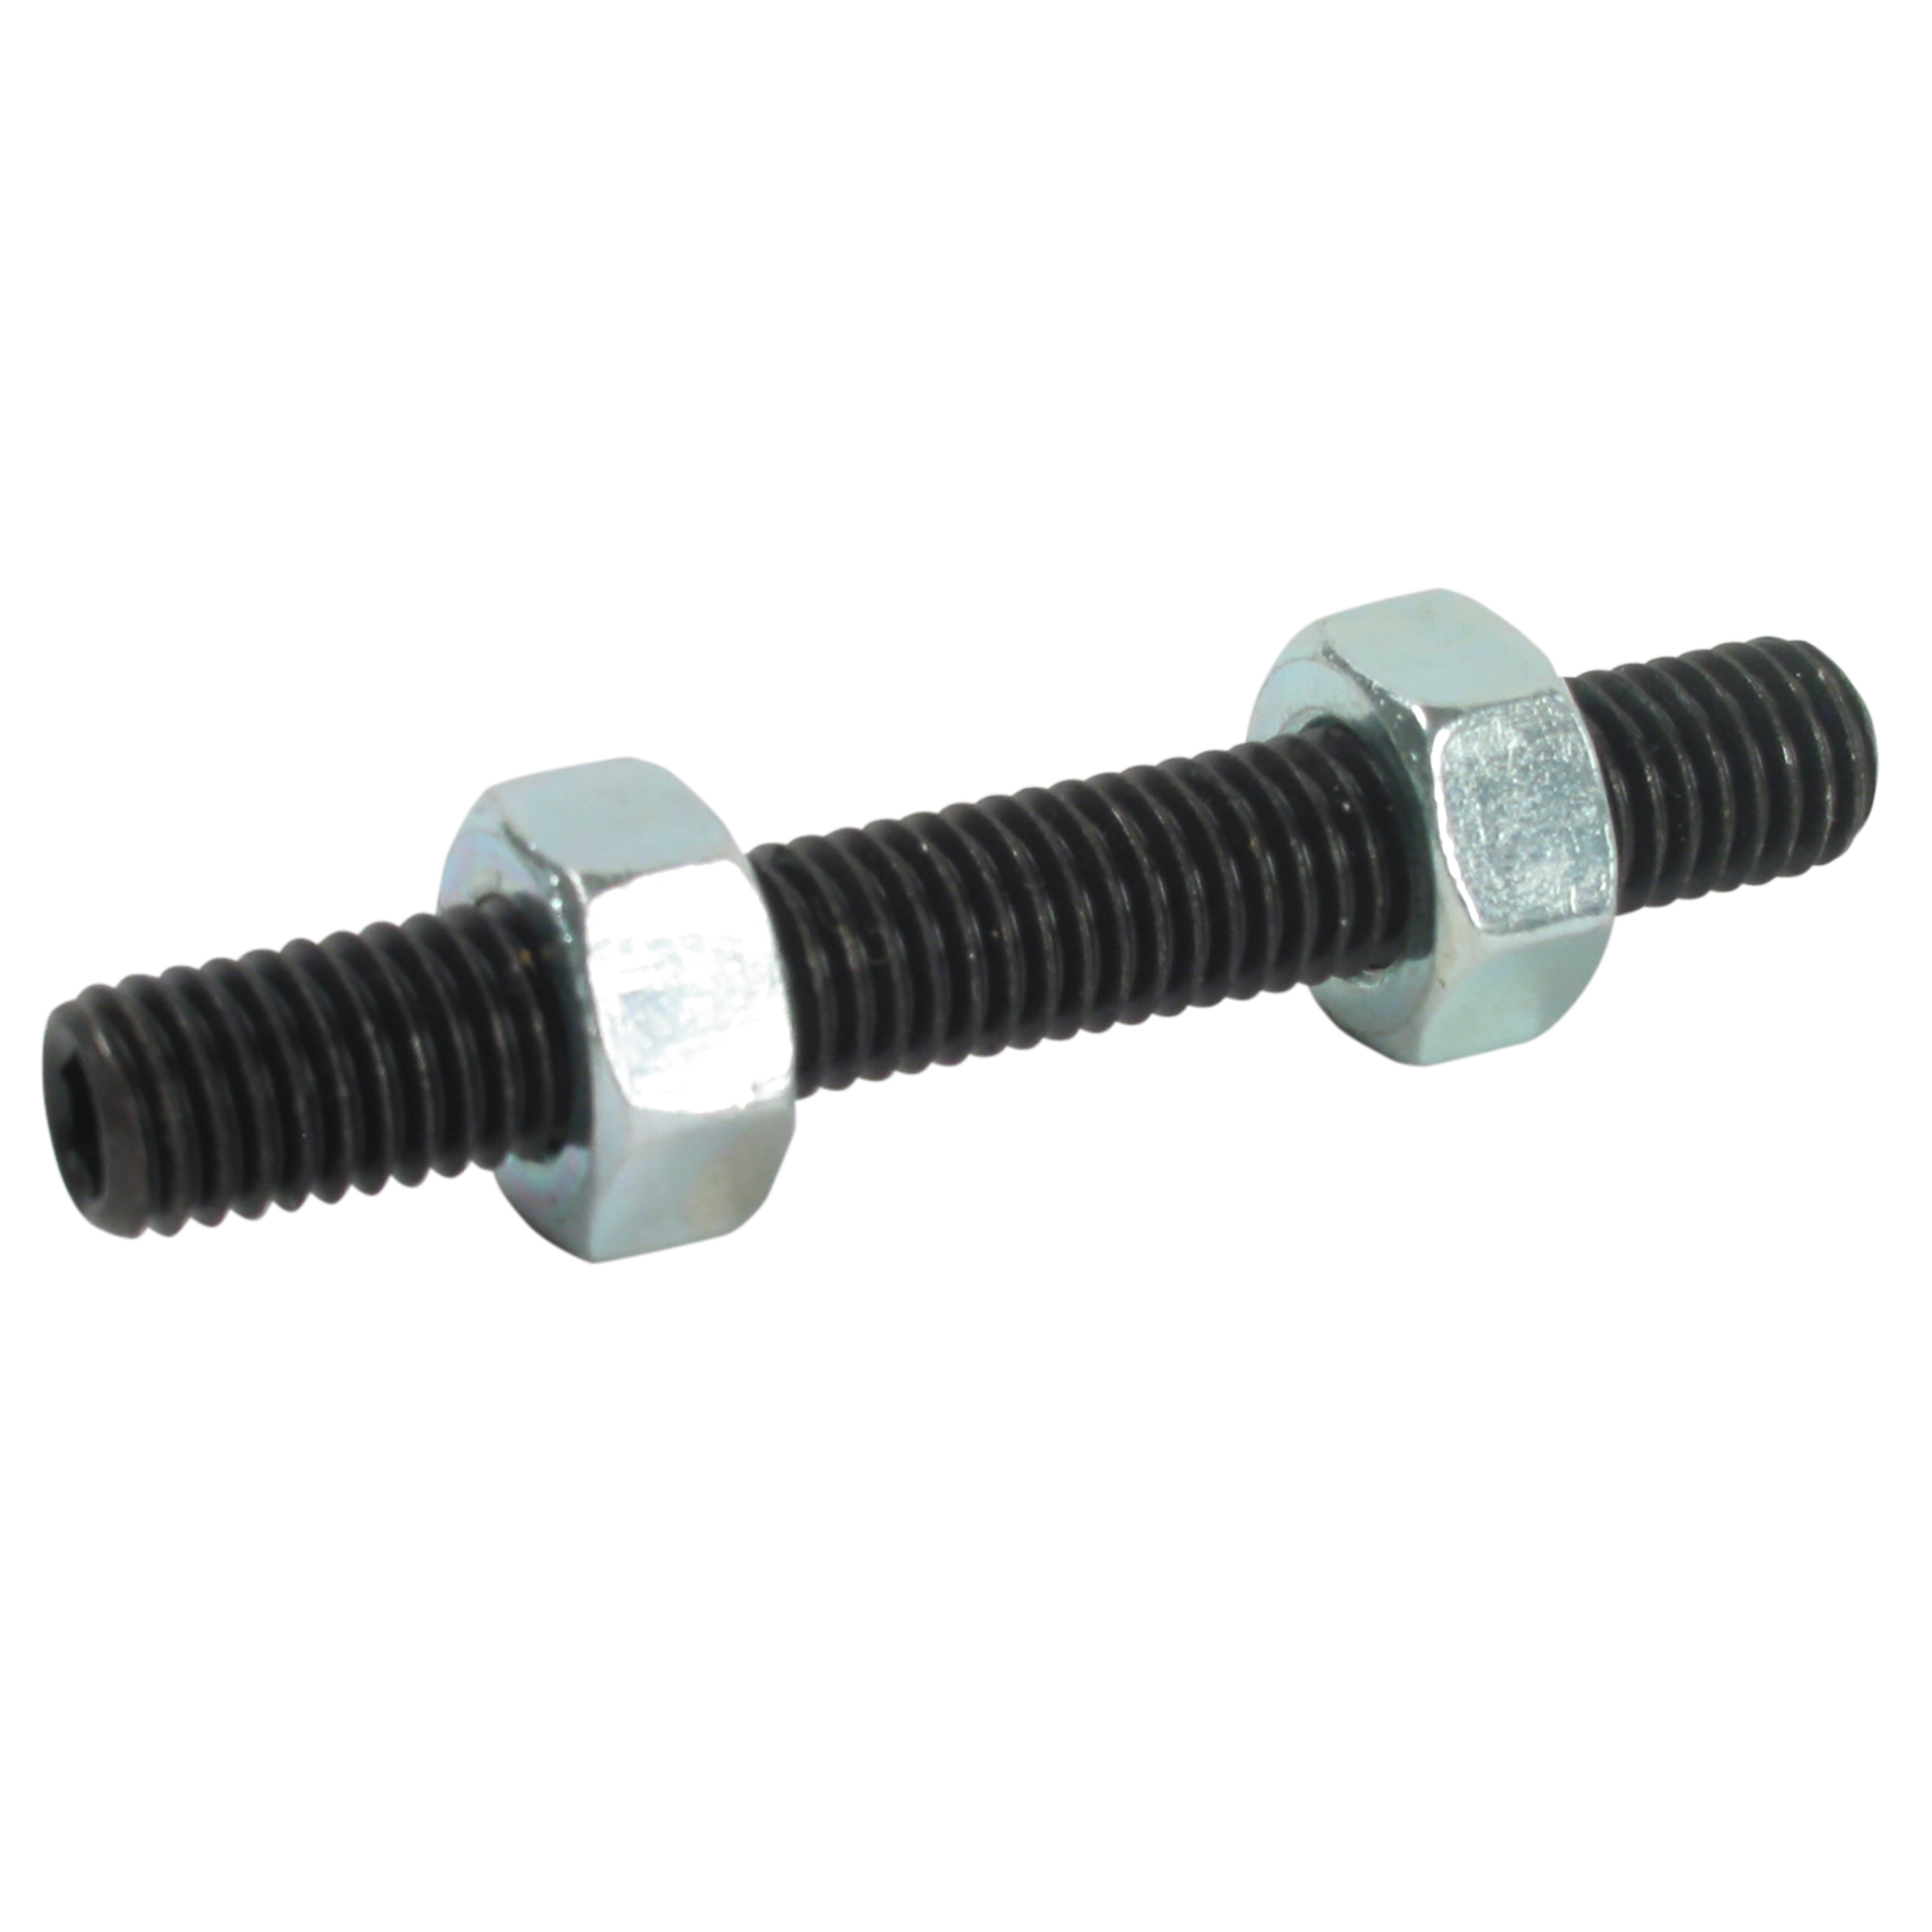 Connection for threaded actuator rod - Connection for threaded actuator rod -  - 